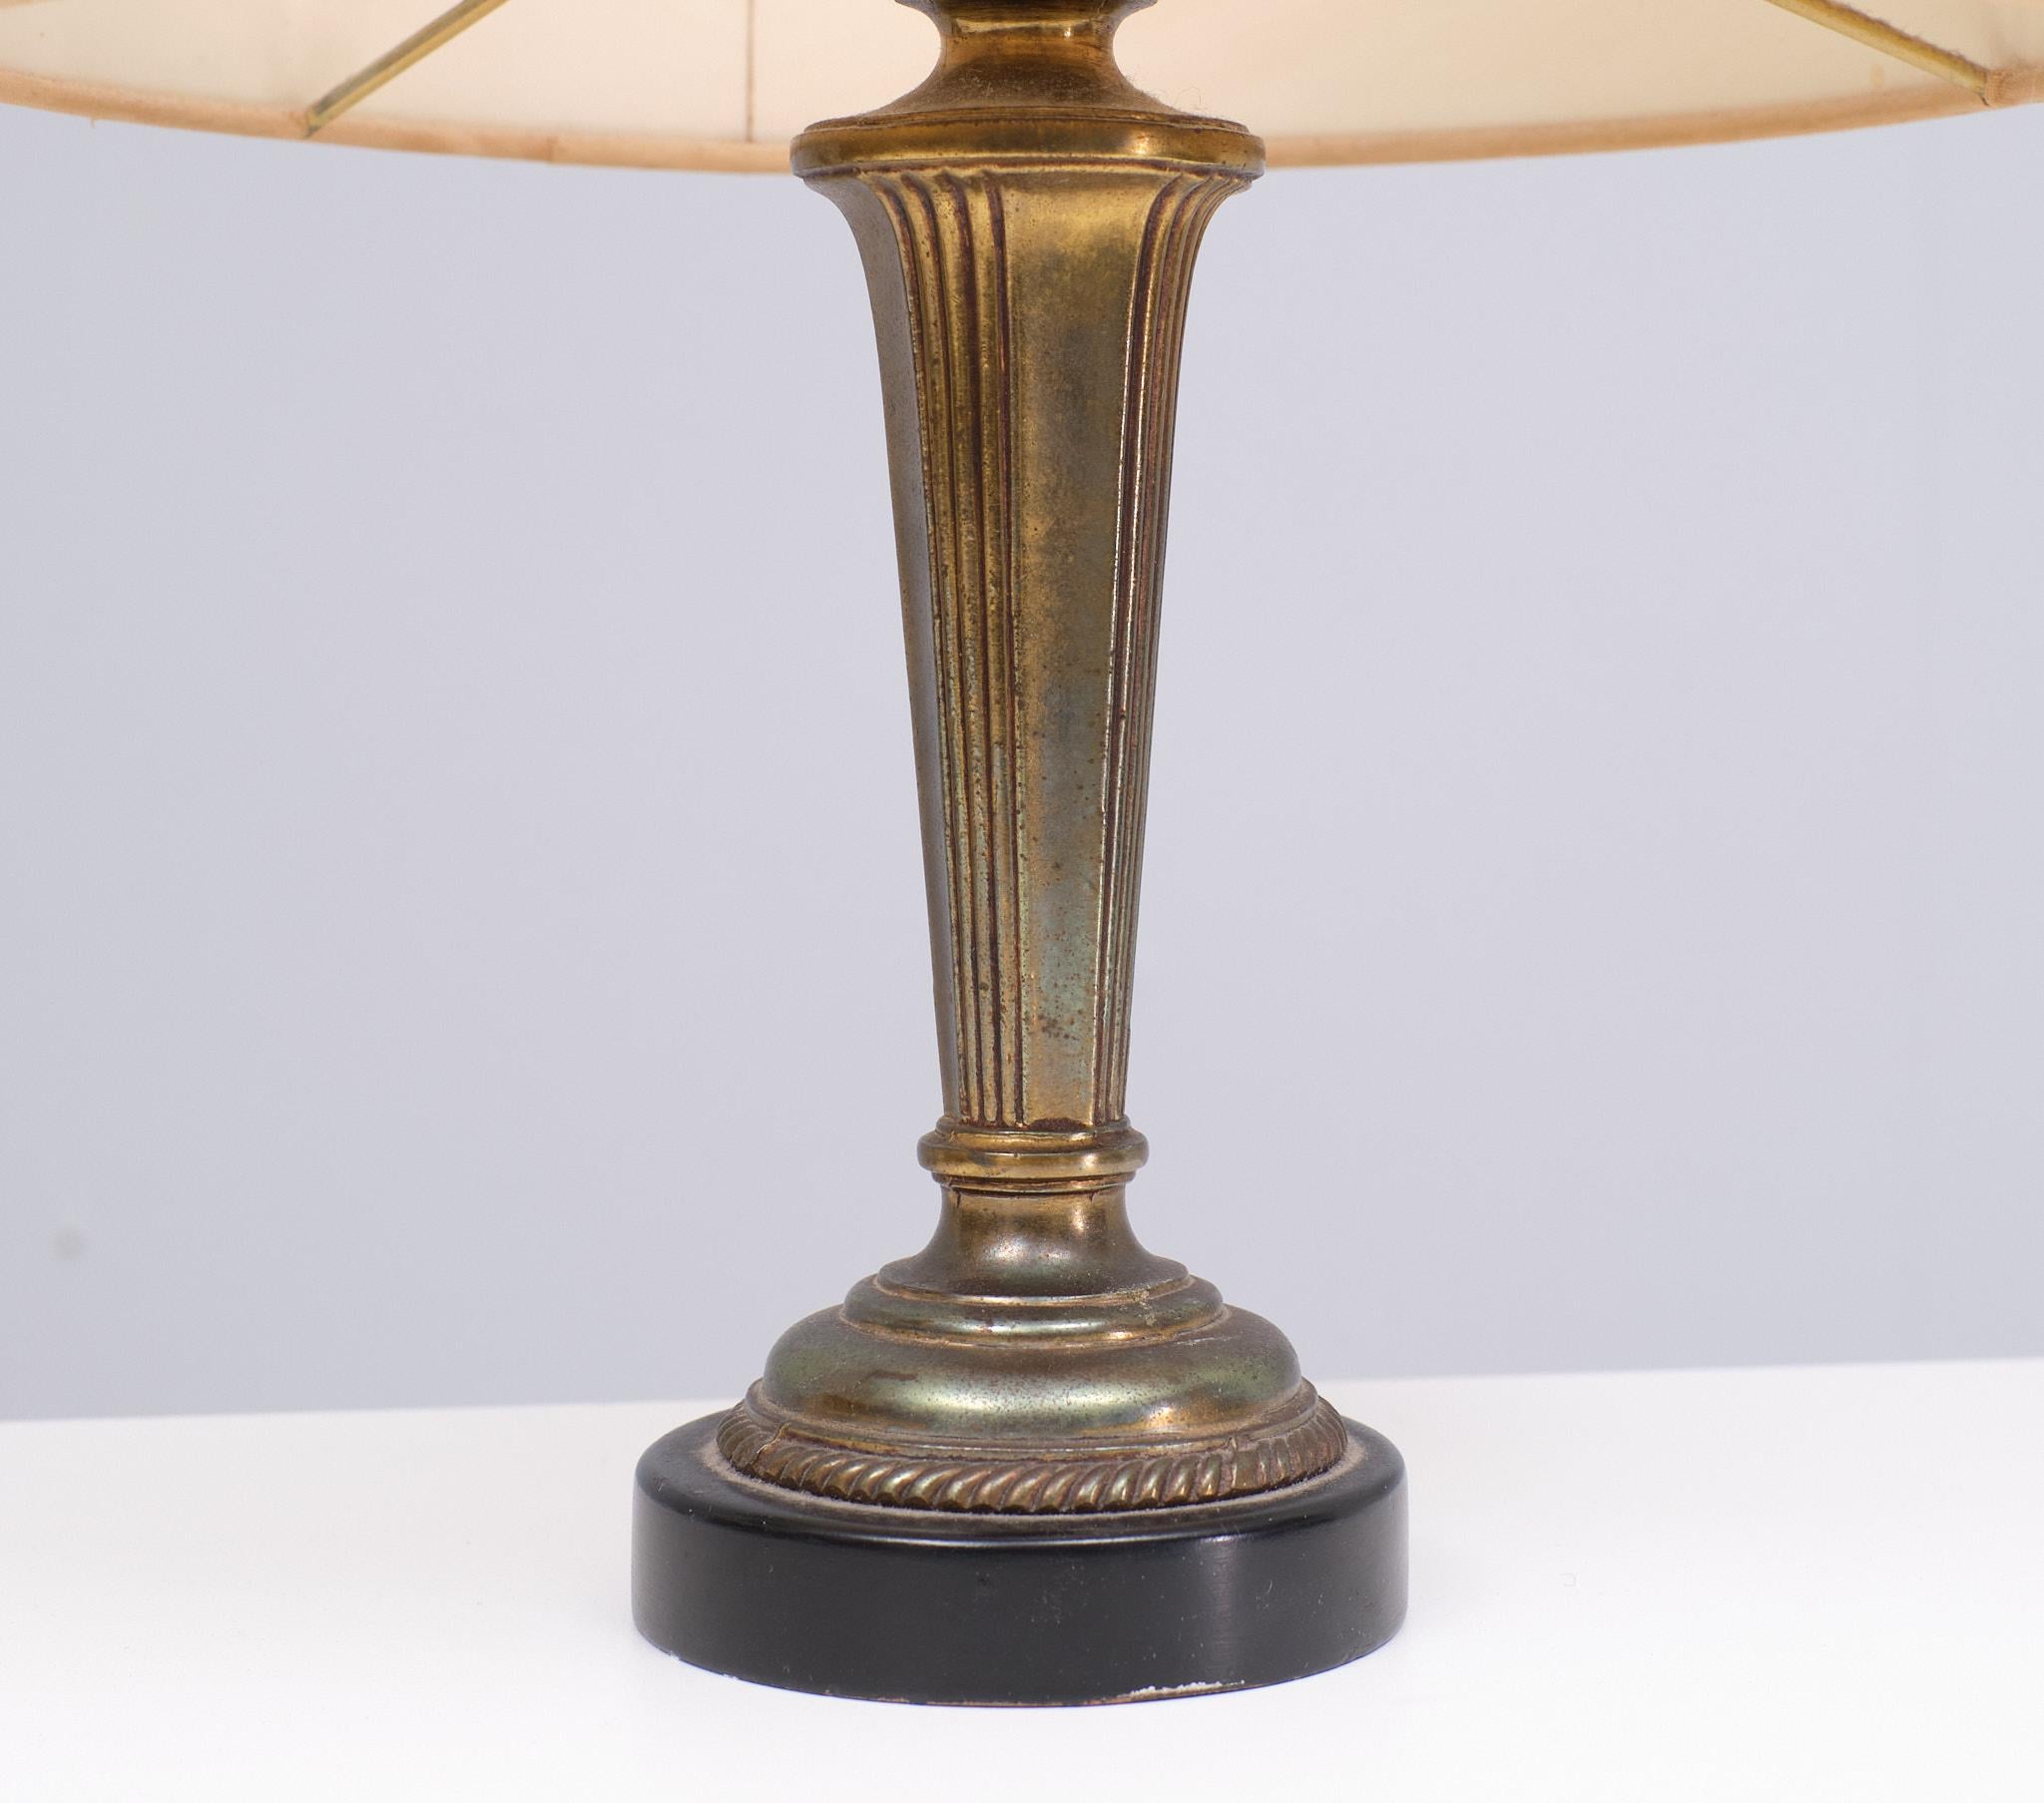 very nice set of table lamps . classic shaped brass base , comes width 
a Antique Gold color round shades . Wooden feet  ,nice attractive set . one large E27 bulb needed .
 